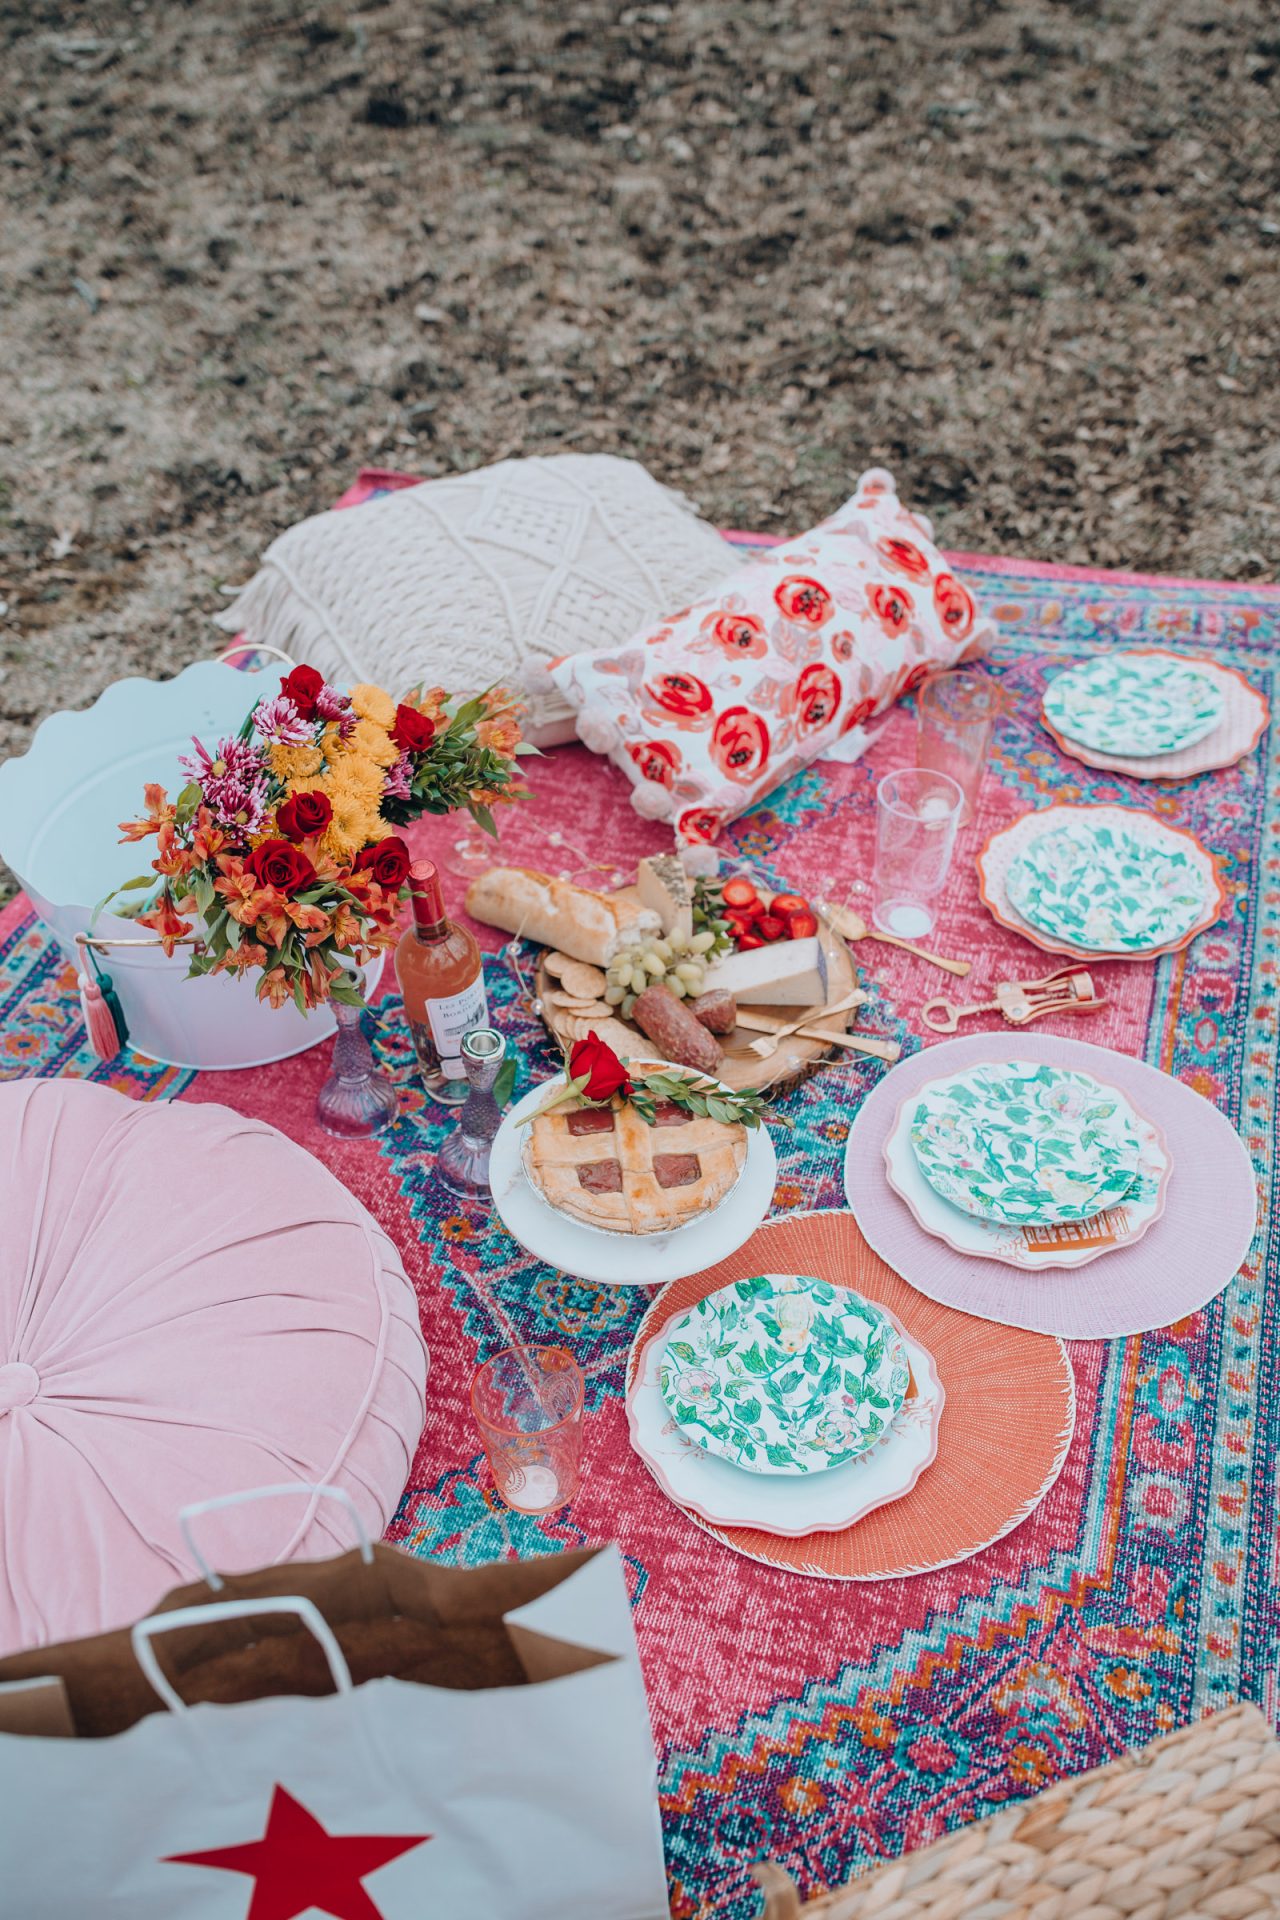 Chicago lifestyle blogger Happily Inspired is sharing the most colorful, bright, and fun Mother’s Day Picnic set up. Think all things bright and colorful!